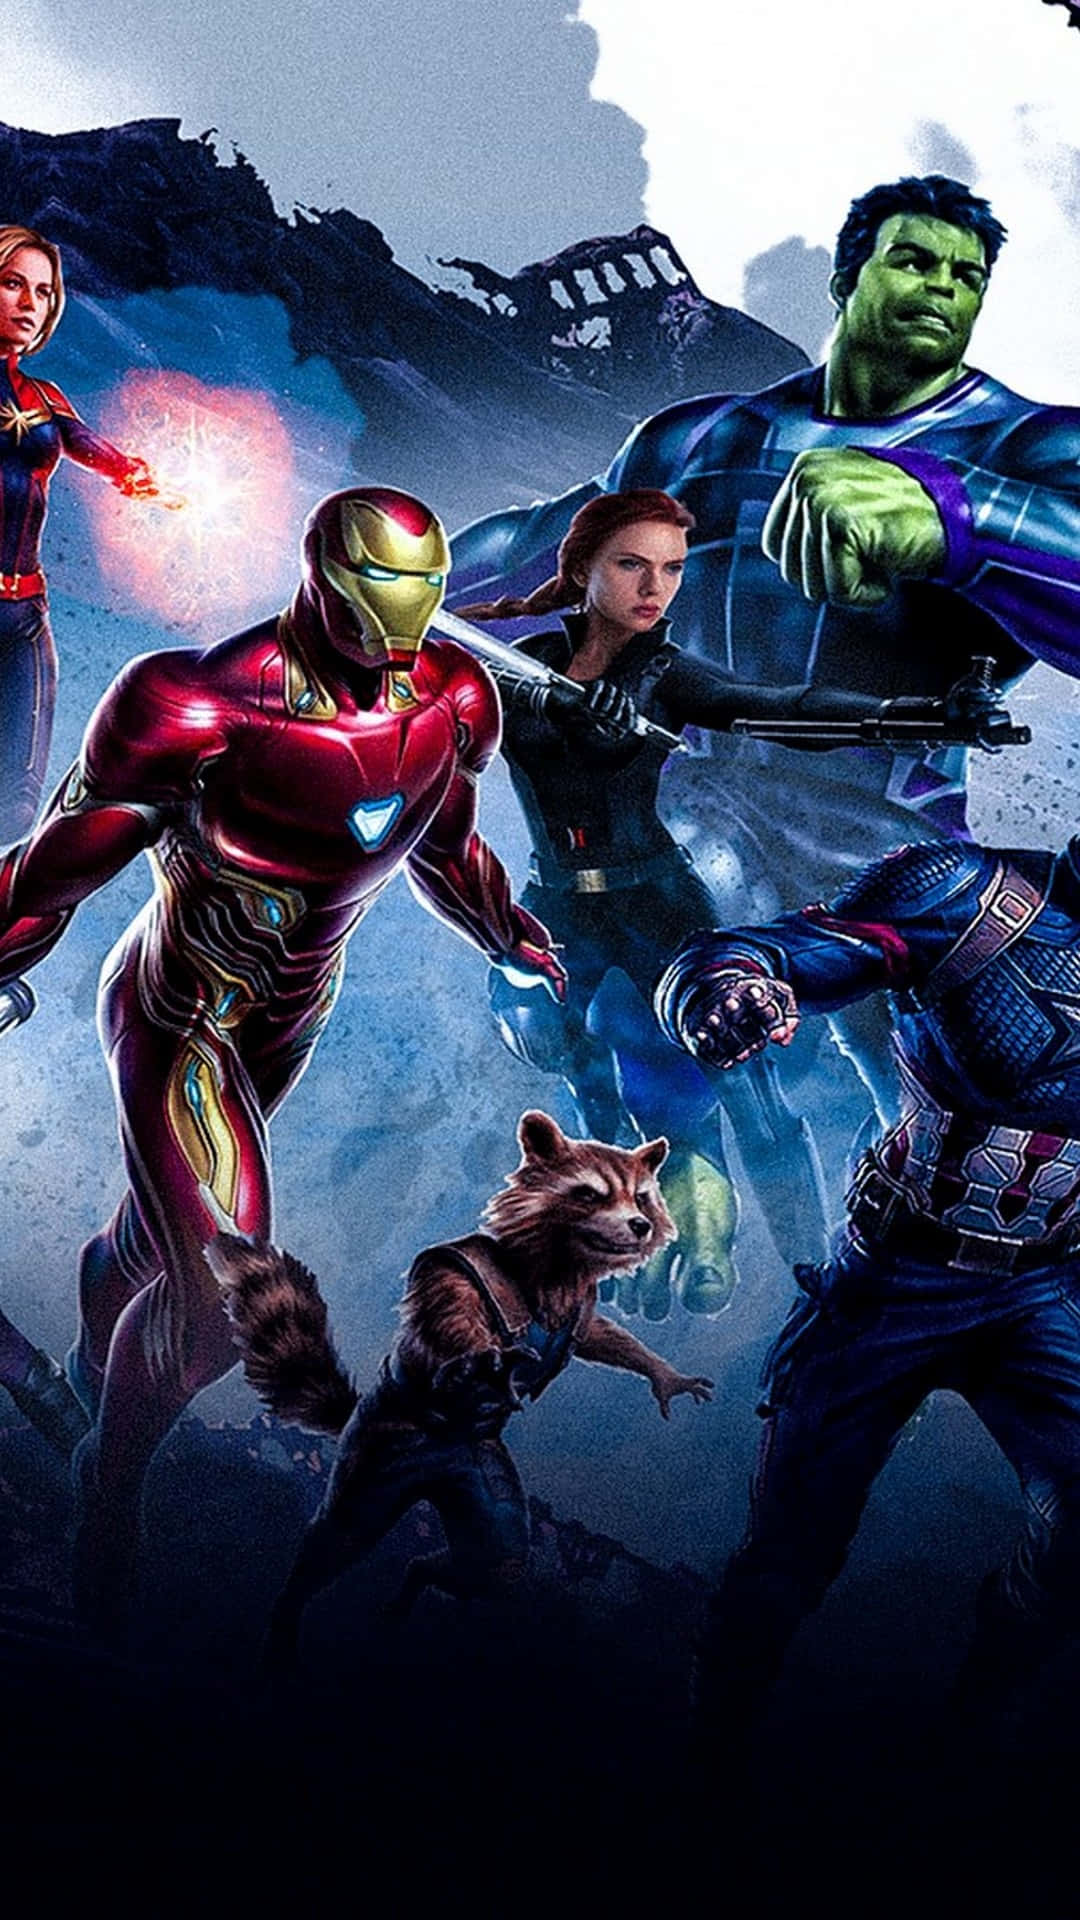 Get the ultimate superhero experience even on the small screen with the Avengers Endgame iPhone Wallpaper